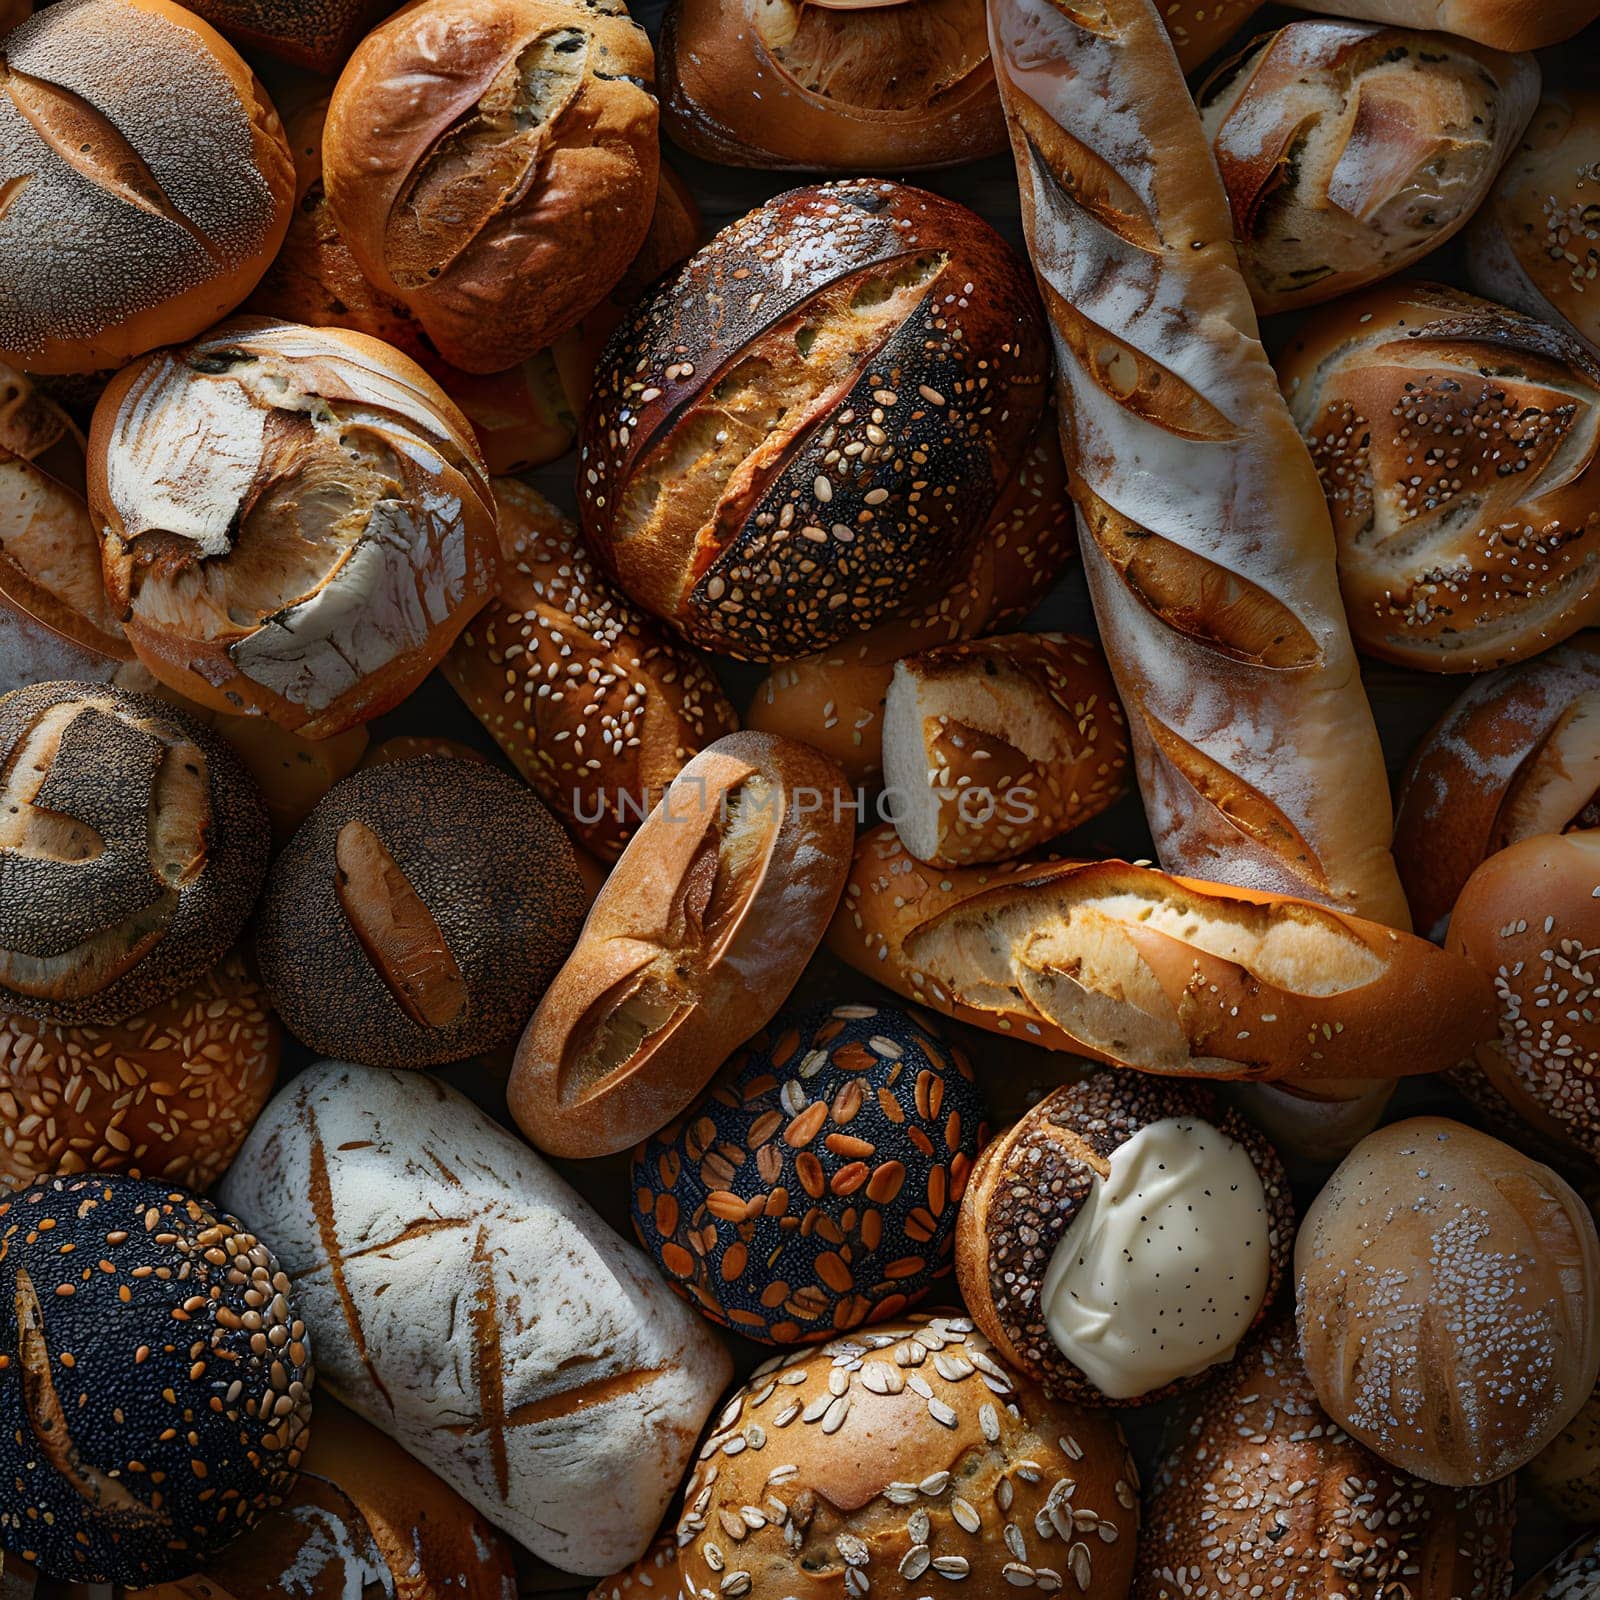 A variety of artisan breads made with different ingredients like seeds, beans, and cocoa beans are stacked on top of each other, showcasing the natural foods and cuisine made with care and precision